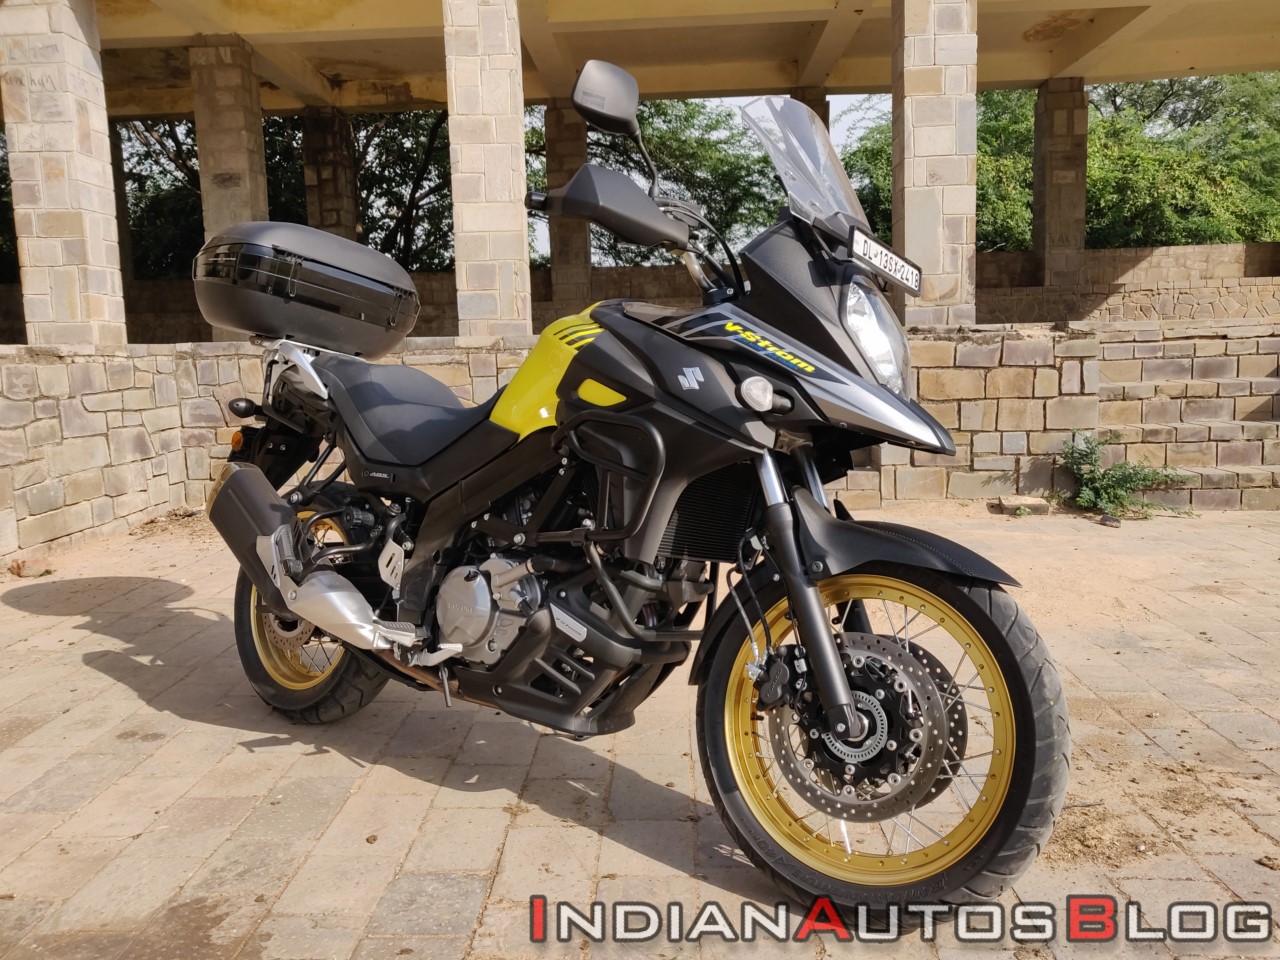 Suzuki V-Strom 650 XT Review: Storming the ADV space